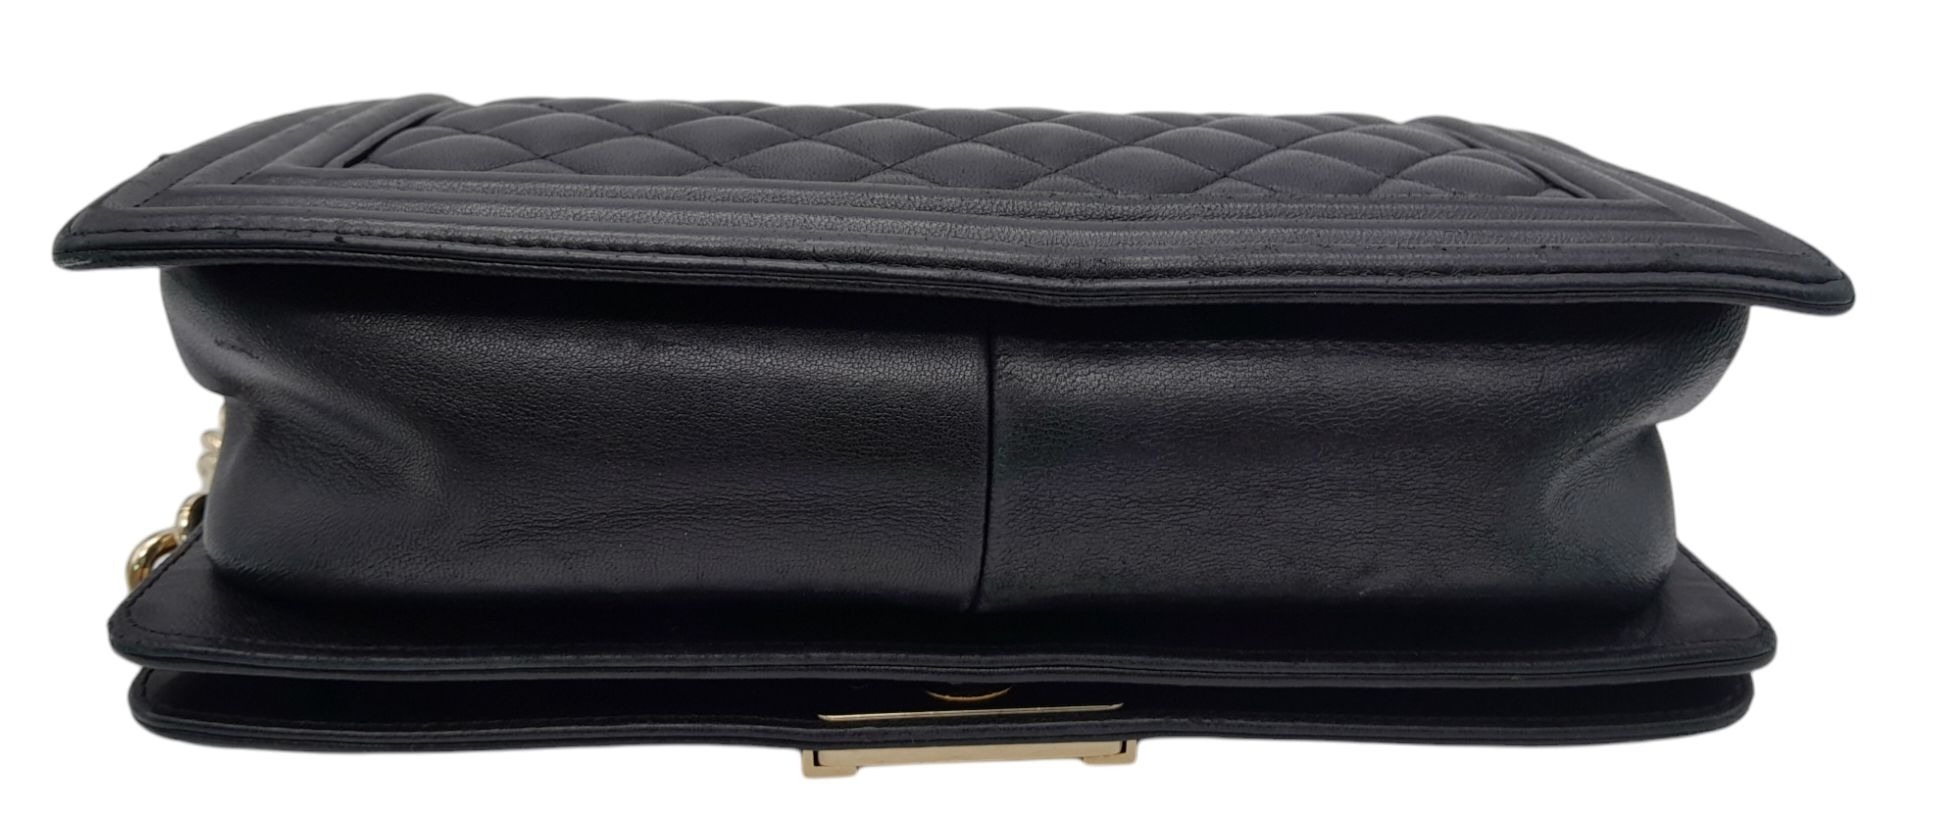 A Chanel Black Boy Bag. Quilted leather exterior with gold-toned hardware, chain and leather - Image 10 of 10